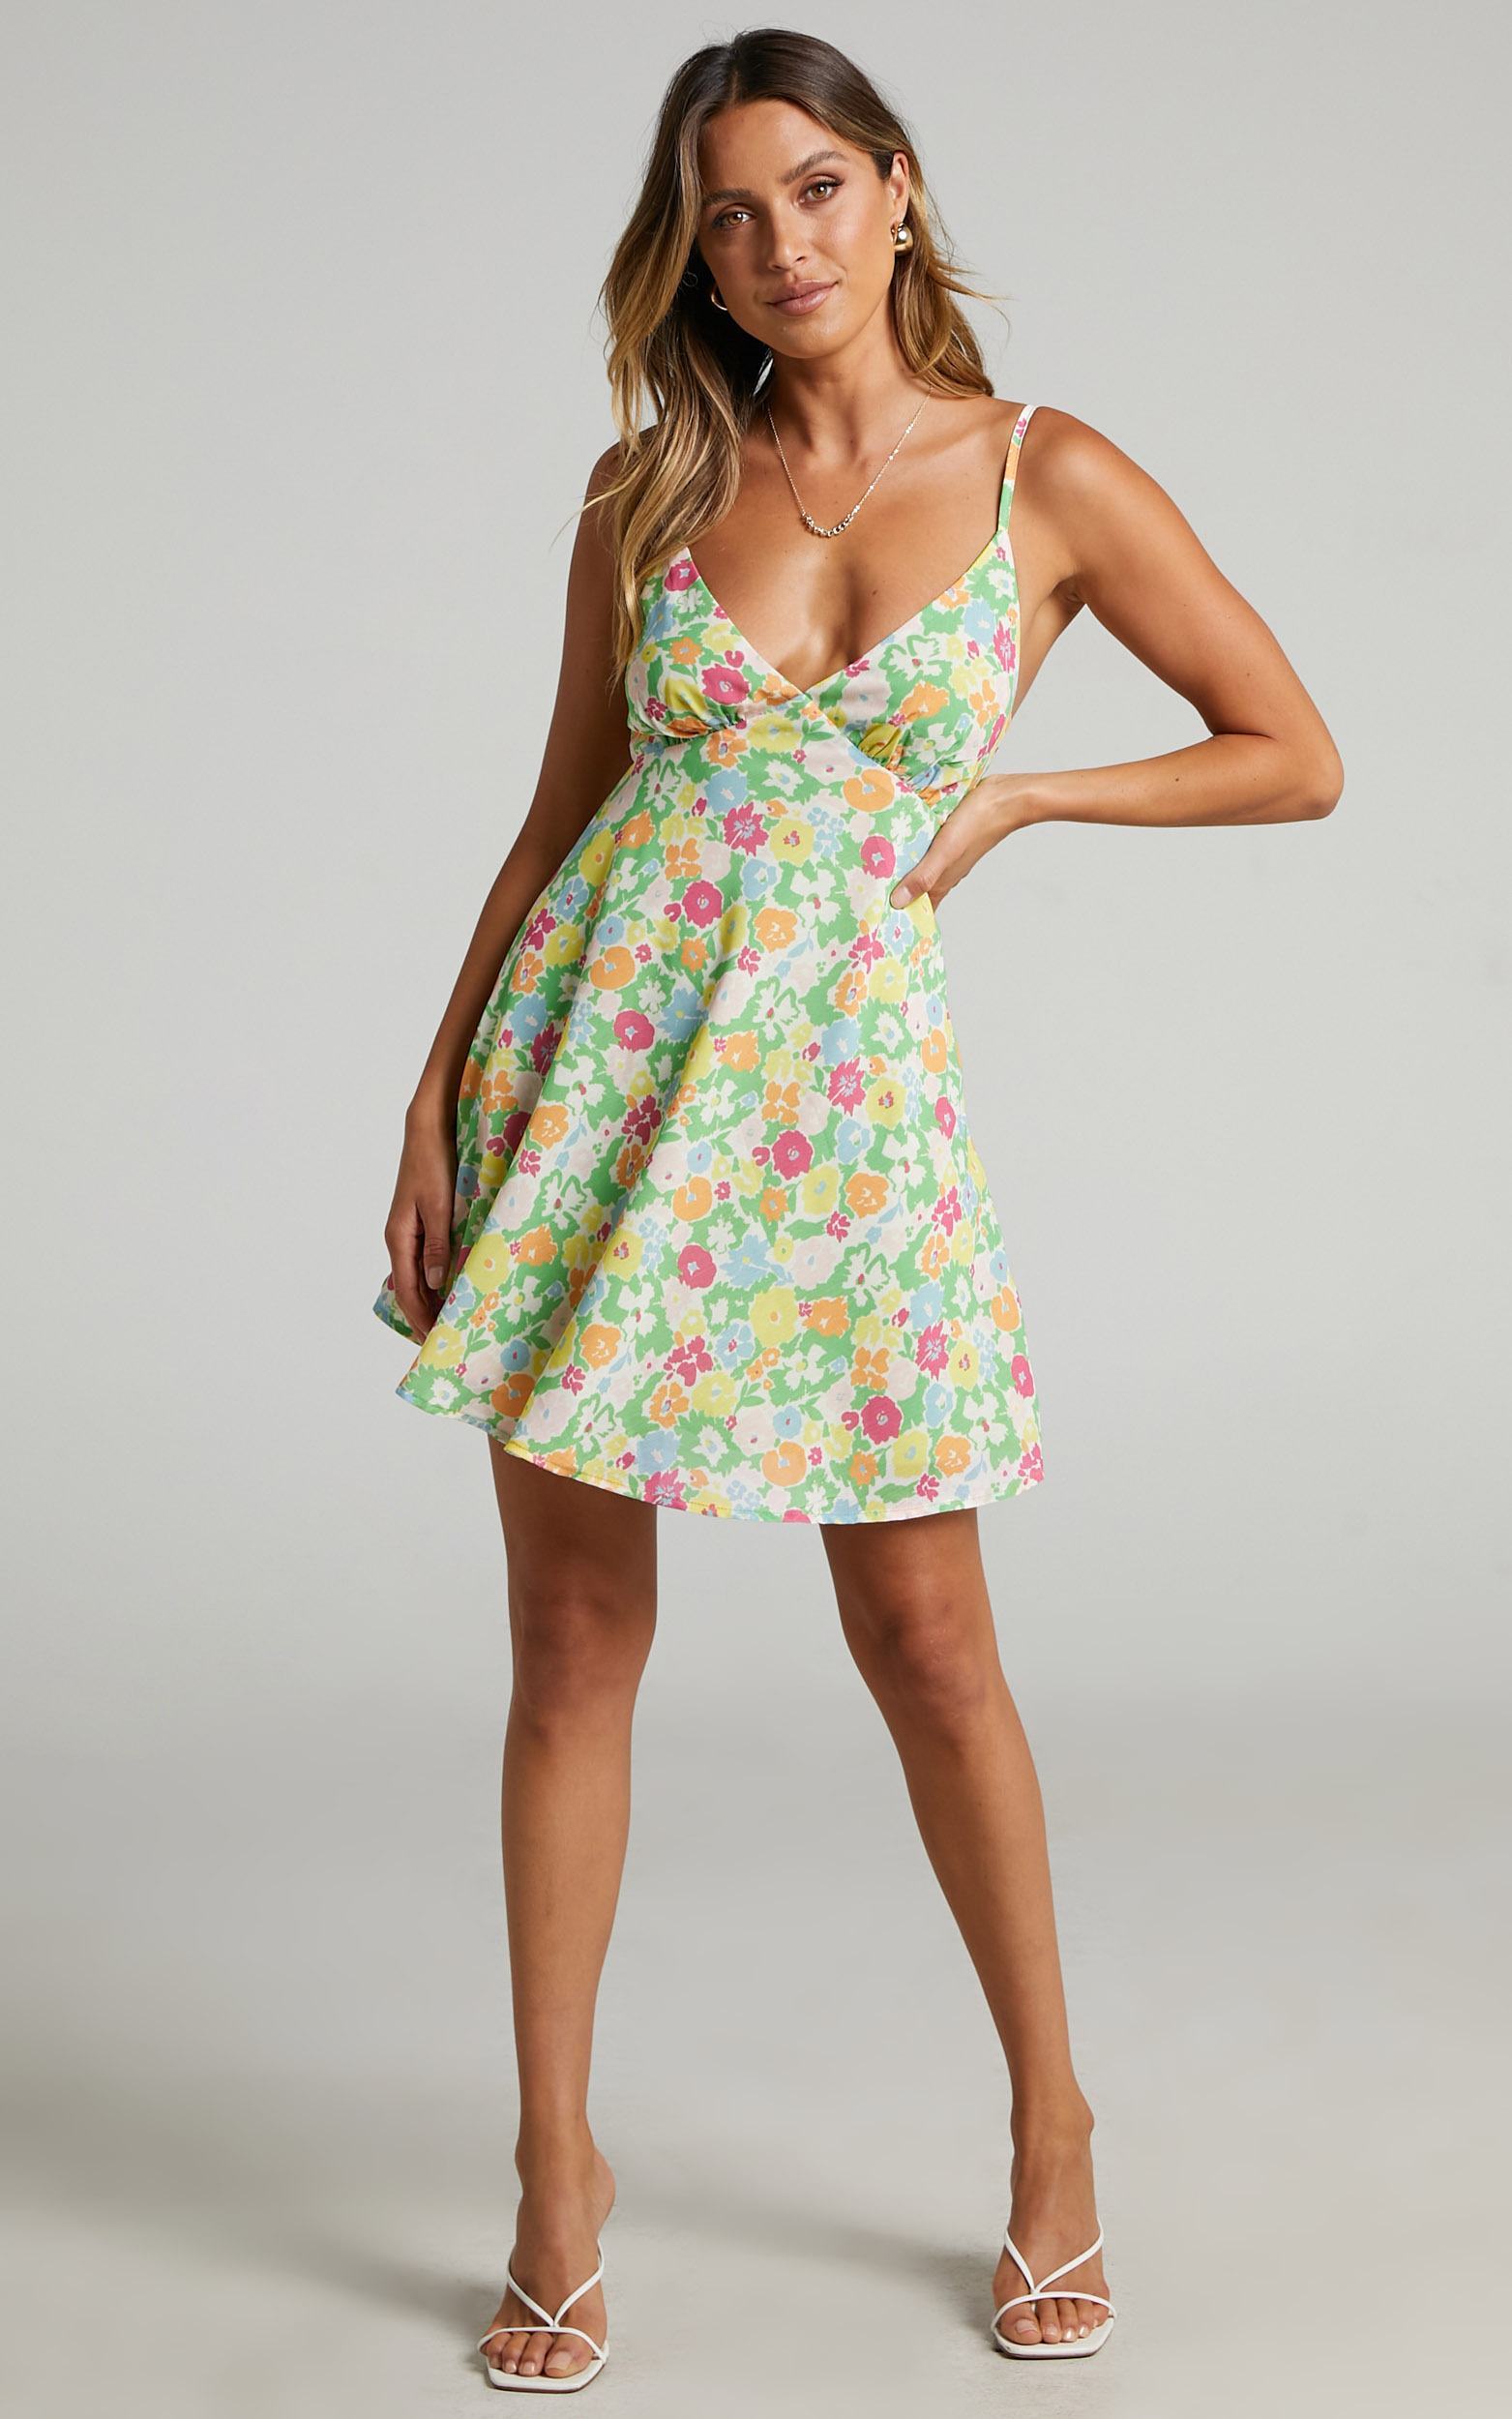 Amanda Posey Floral Mini Dress in posey floral - 06, GRN1, hi-res image number null